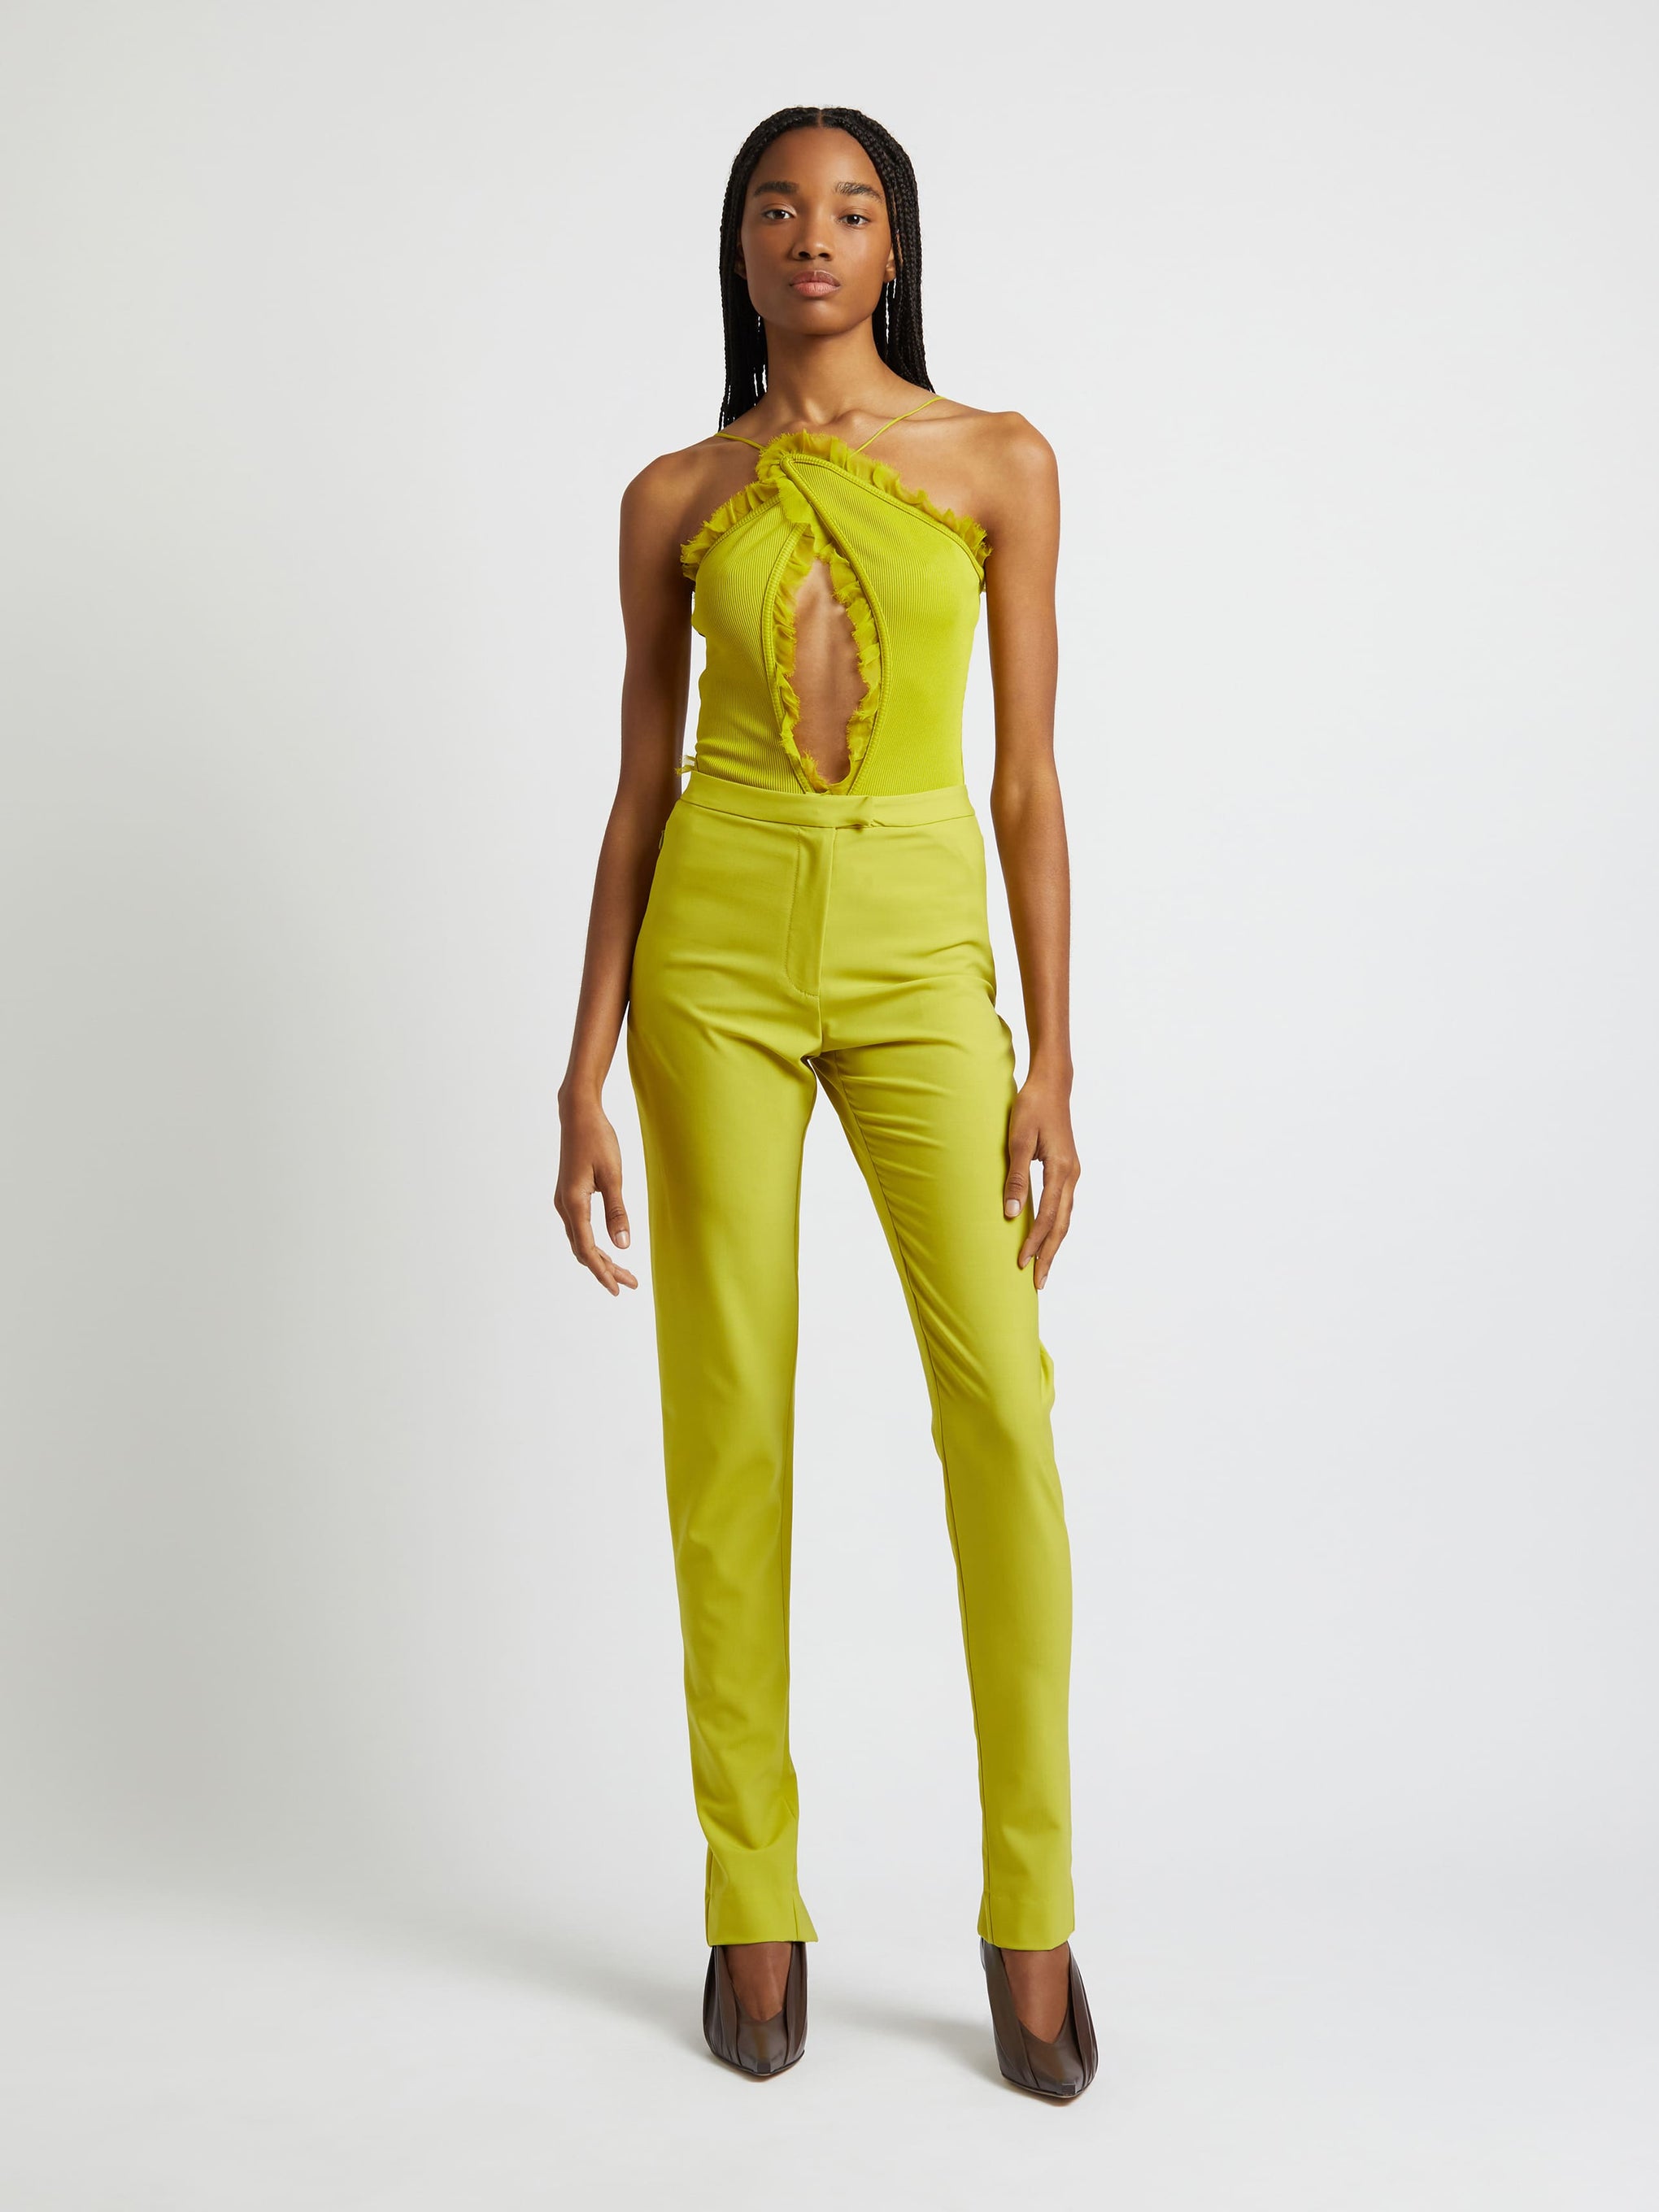 Christopher Esber Carina Interlinked Bodysuit in Limeade available at The New Trend Australia.